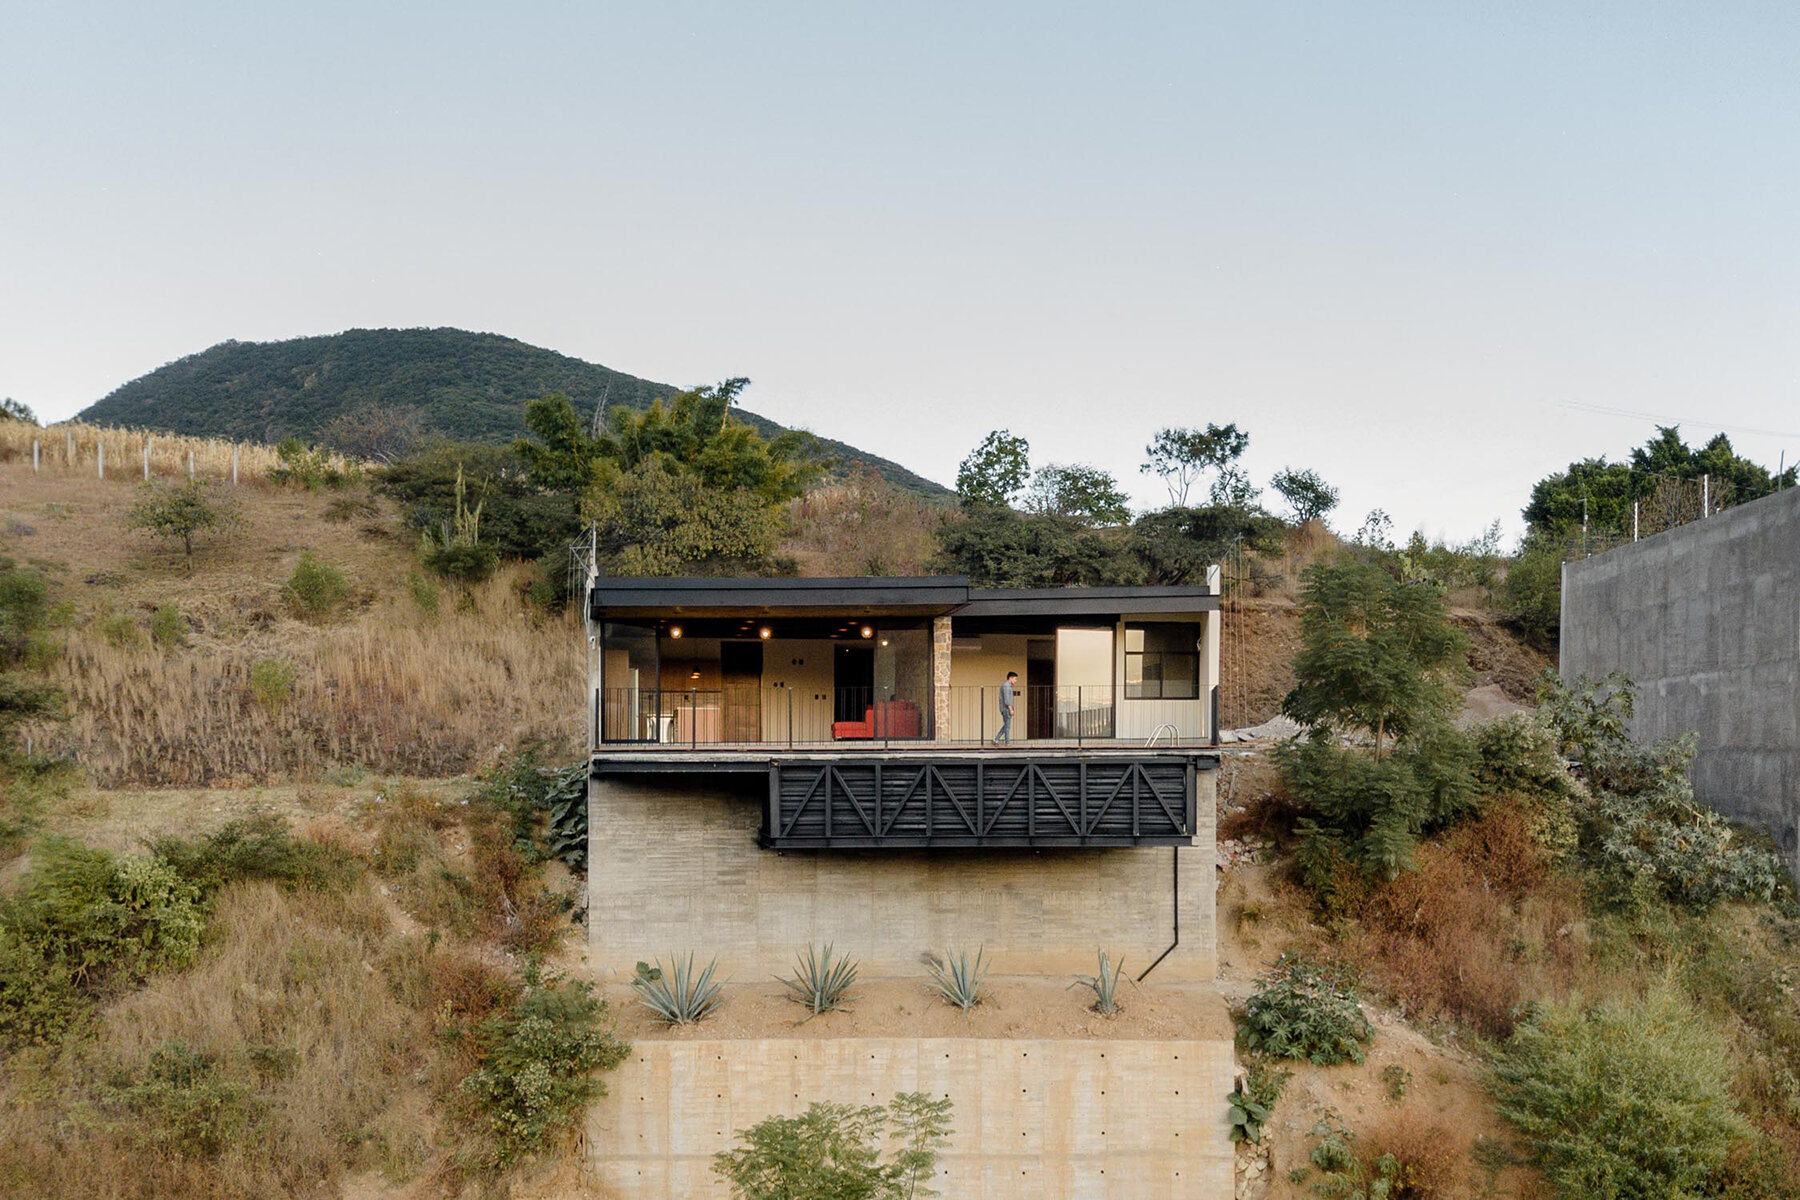 WATG and Studio PCH join up to design palatial Mexican retreat